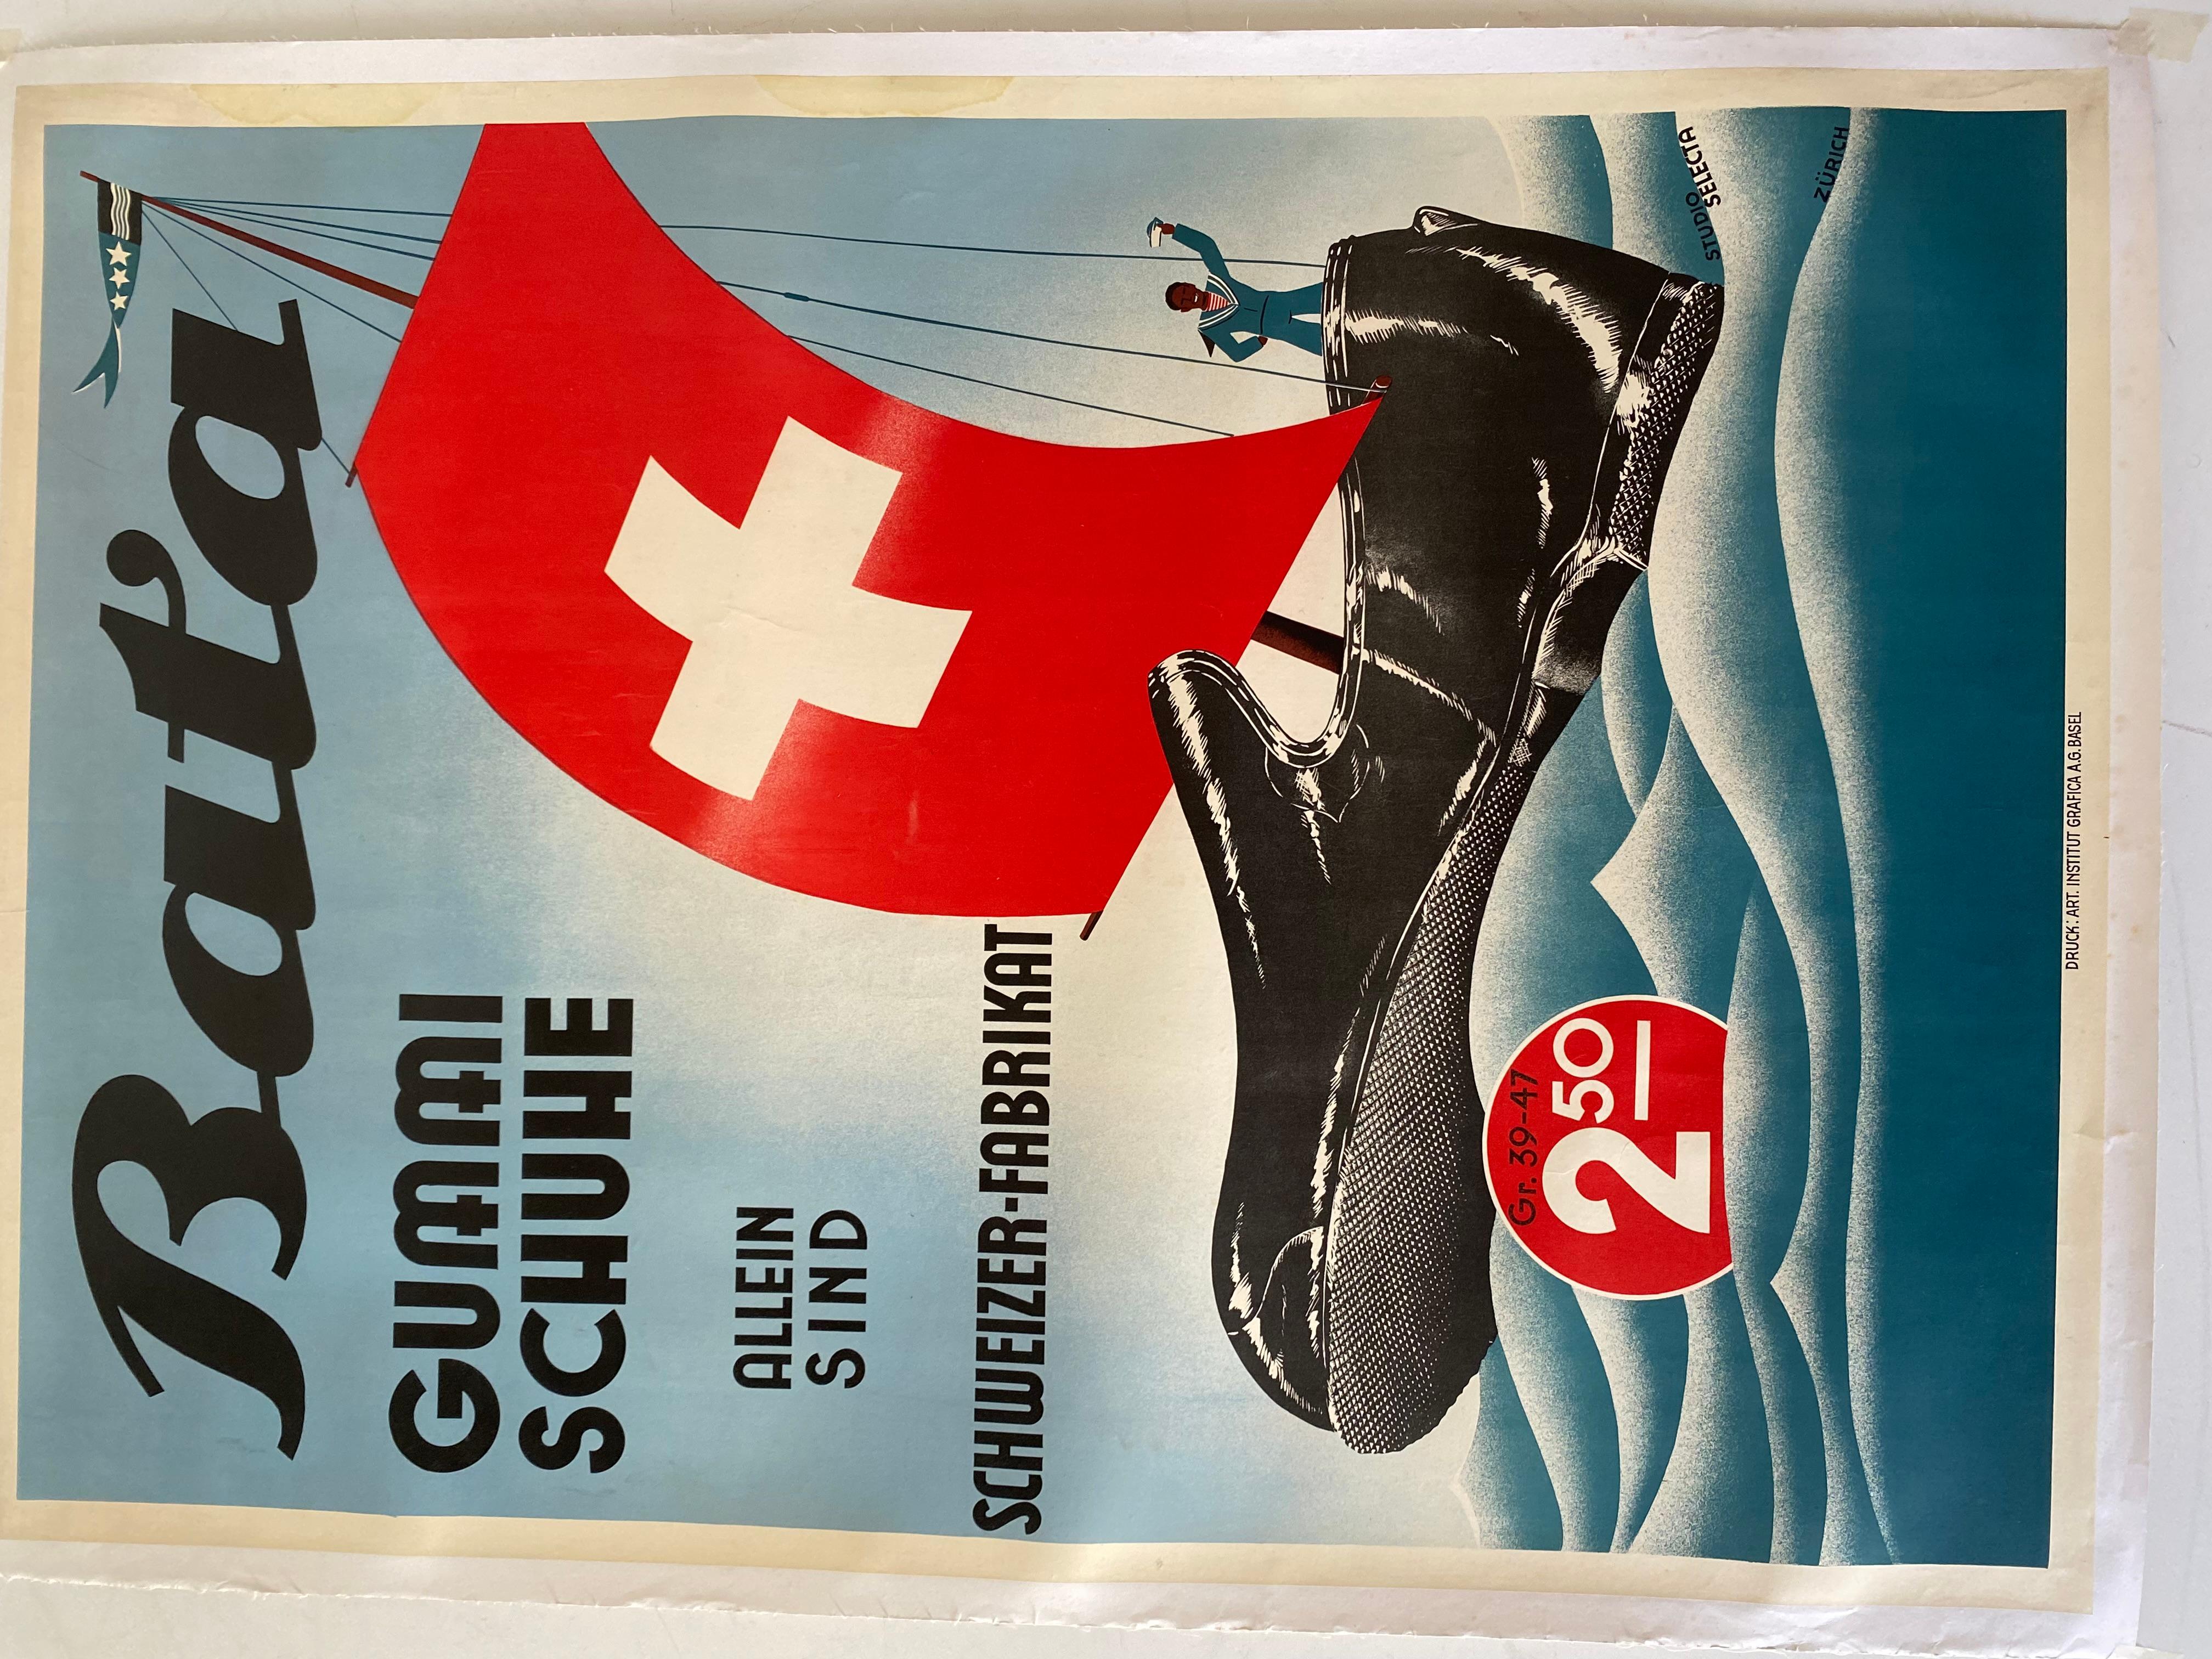 Original BATA poster from the late 1950. Canvas paper and vivid colors. Advertising poster of the worldwide well known BATA SHOE ORGANIZATION.

Very good conditions with some signs of time.